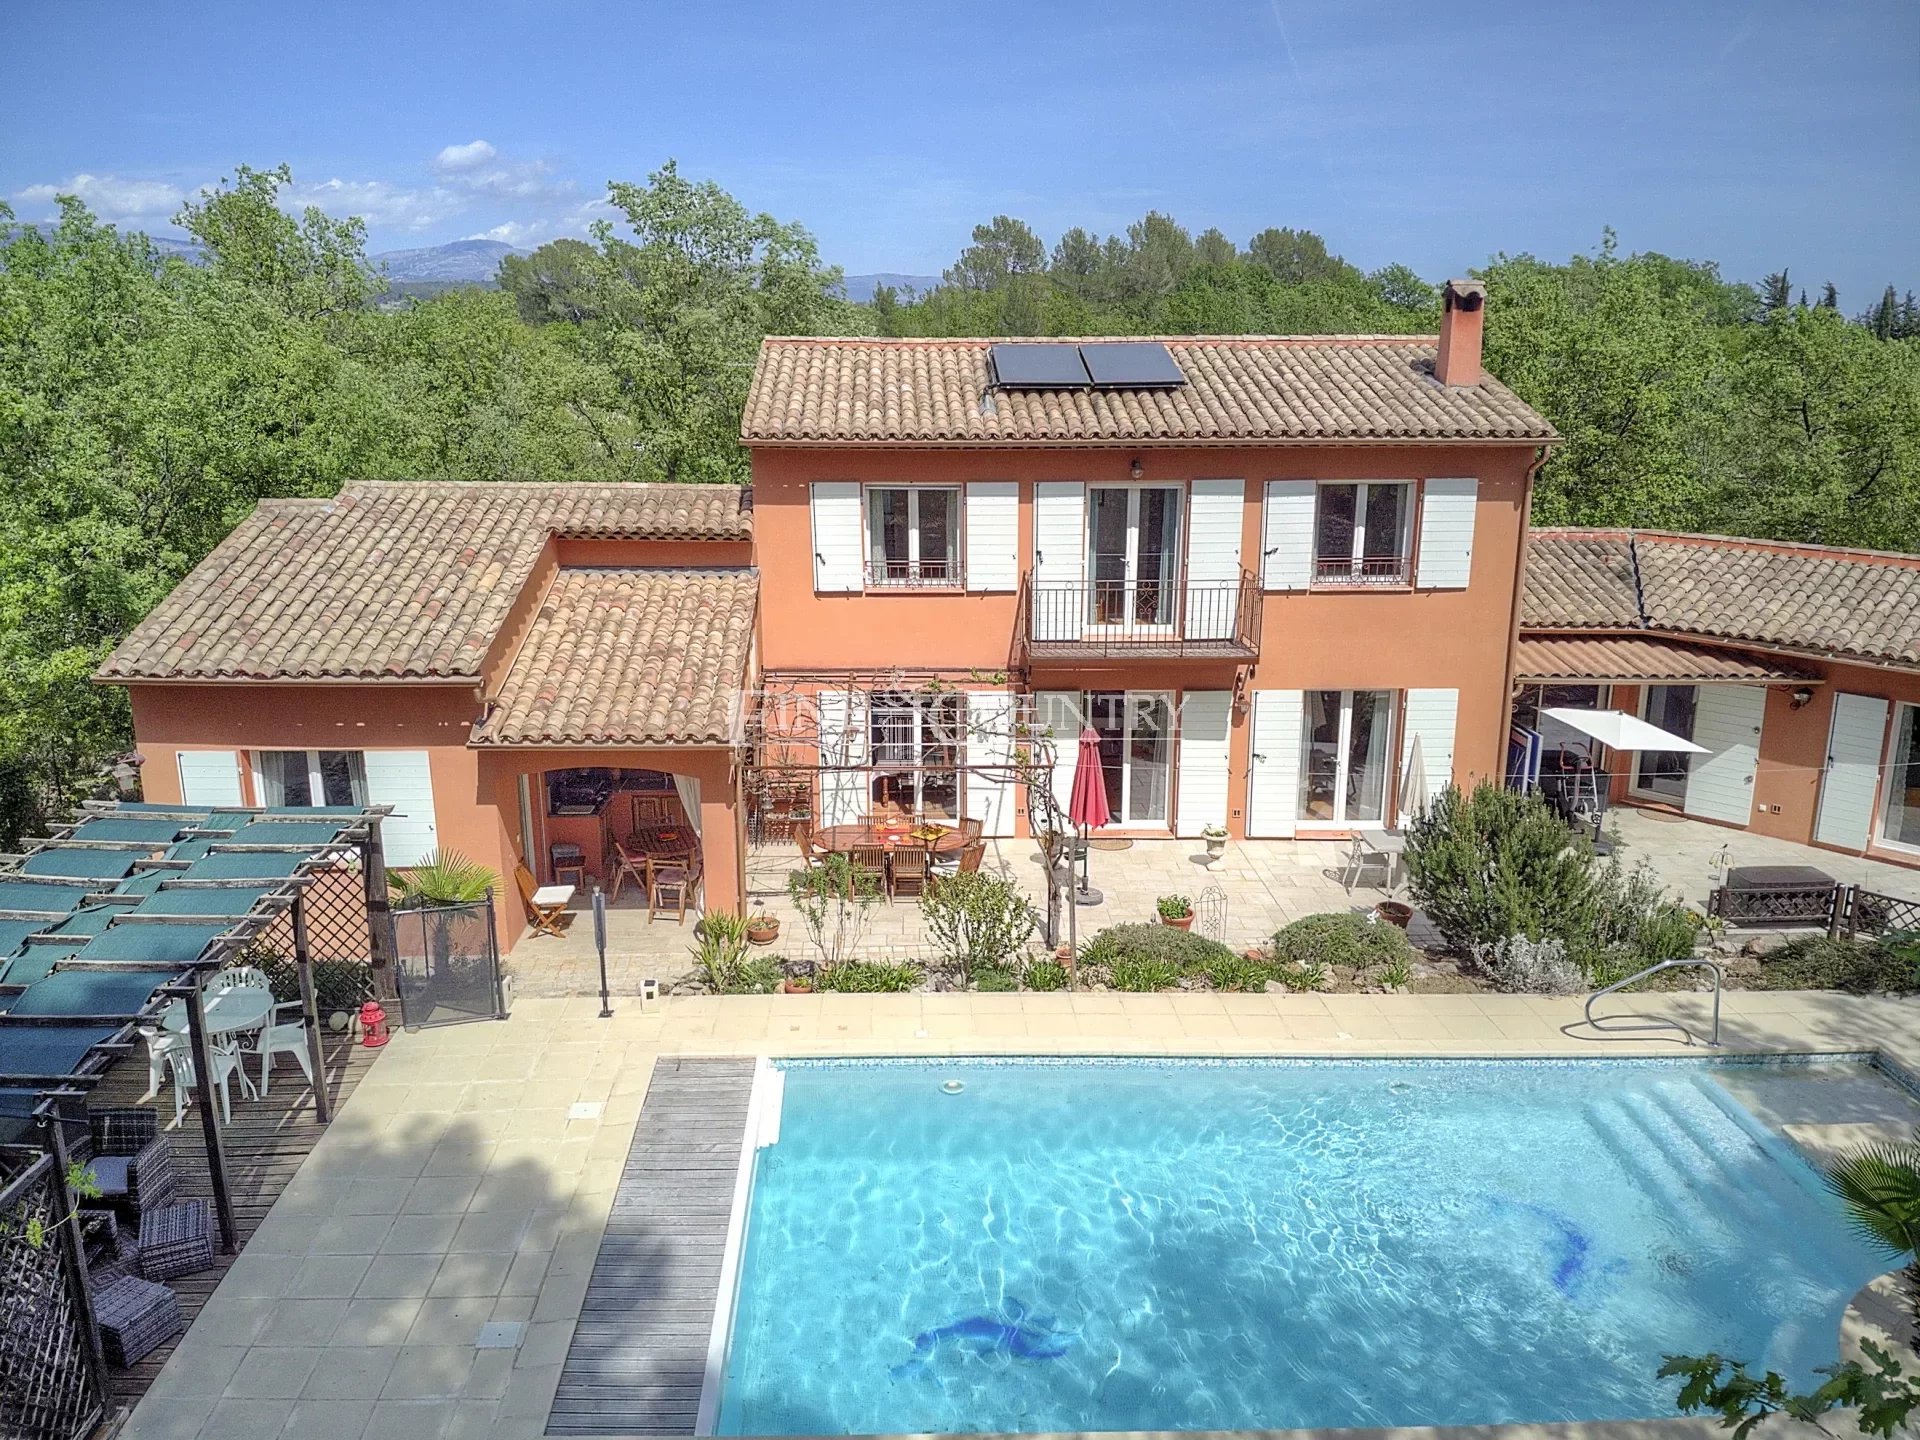 Villa for sale in Fayence with swimming pool